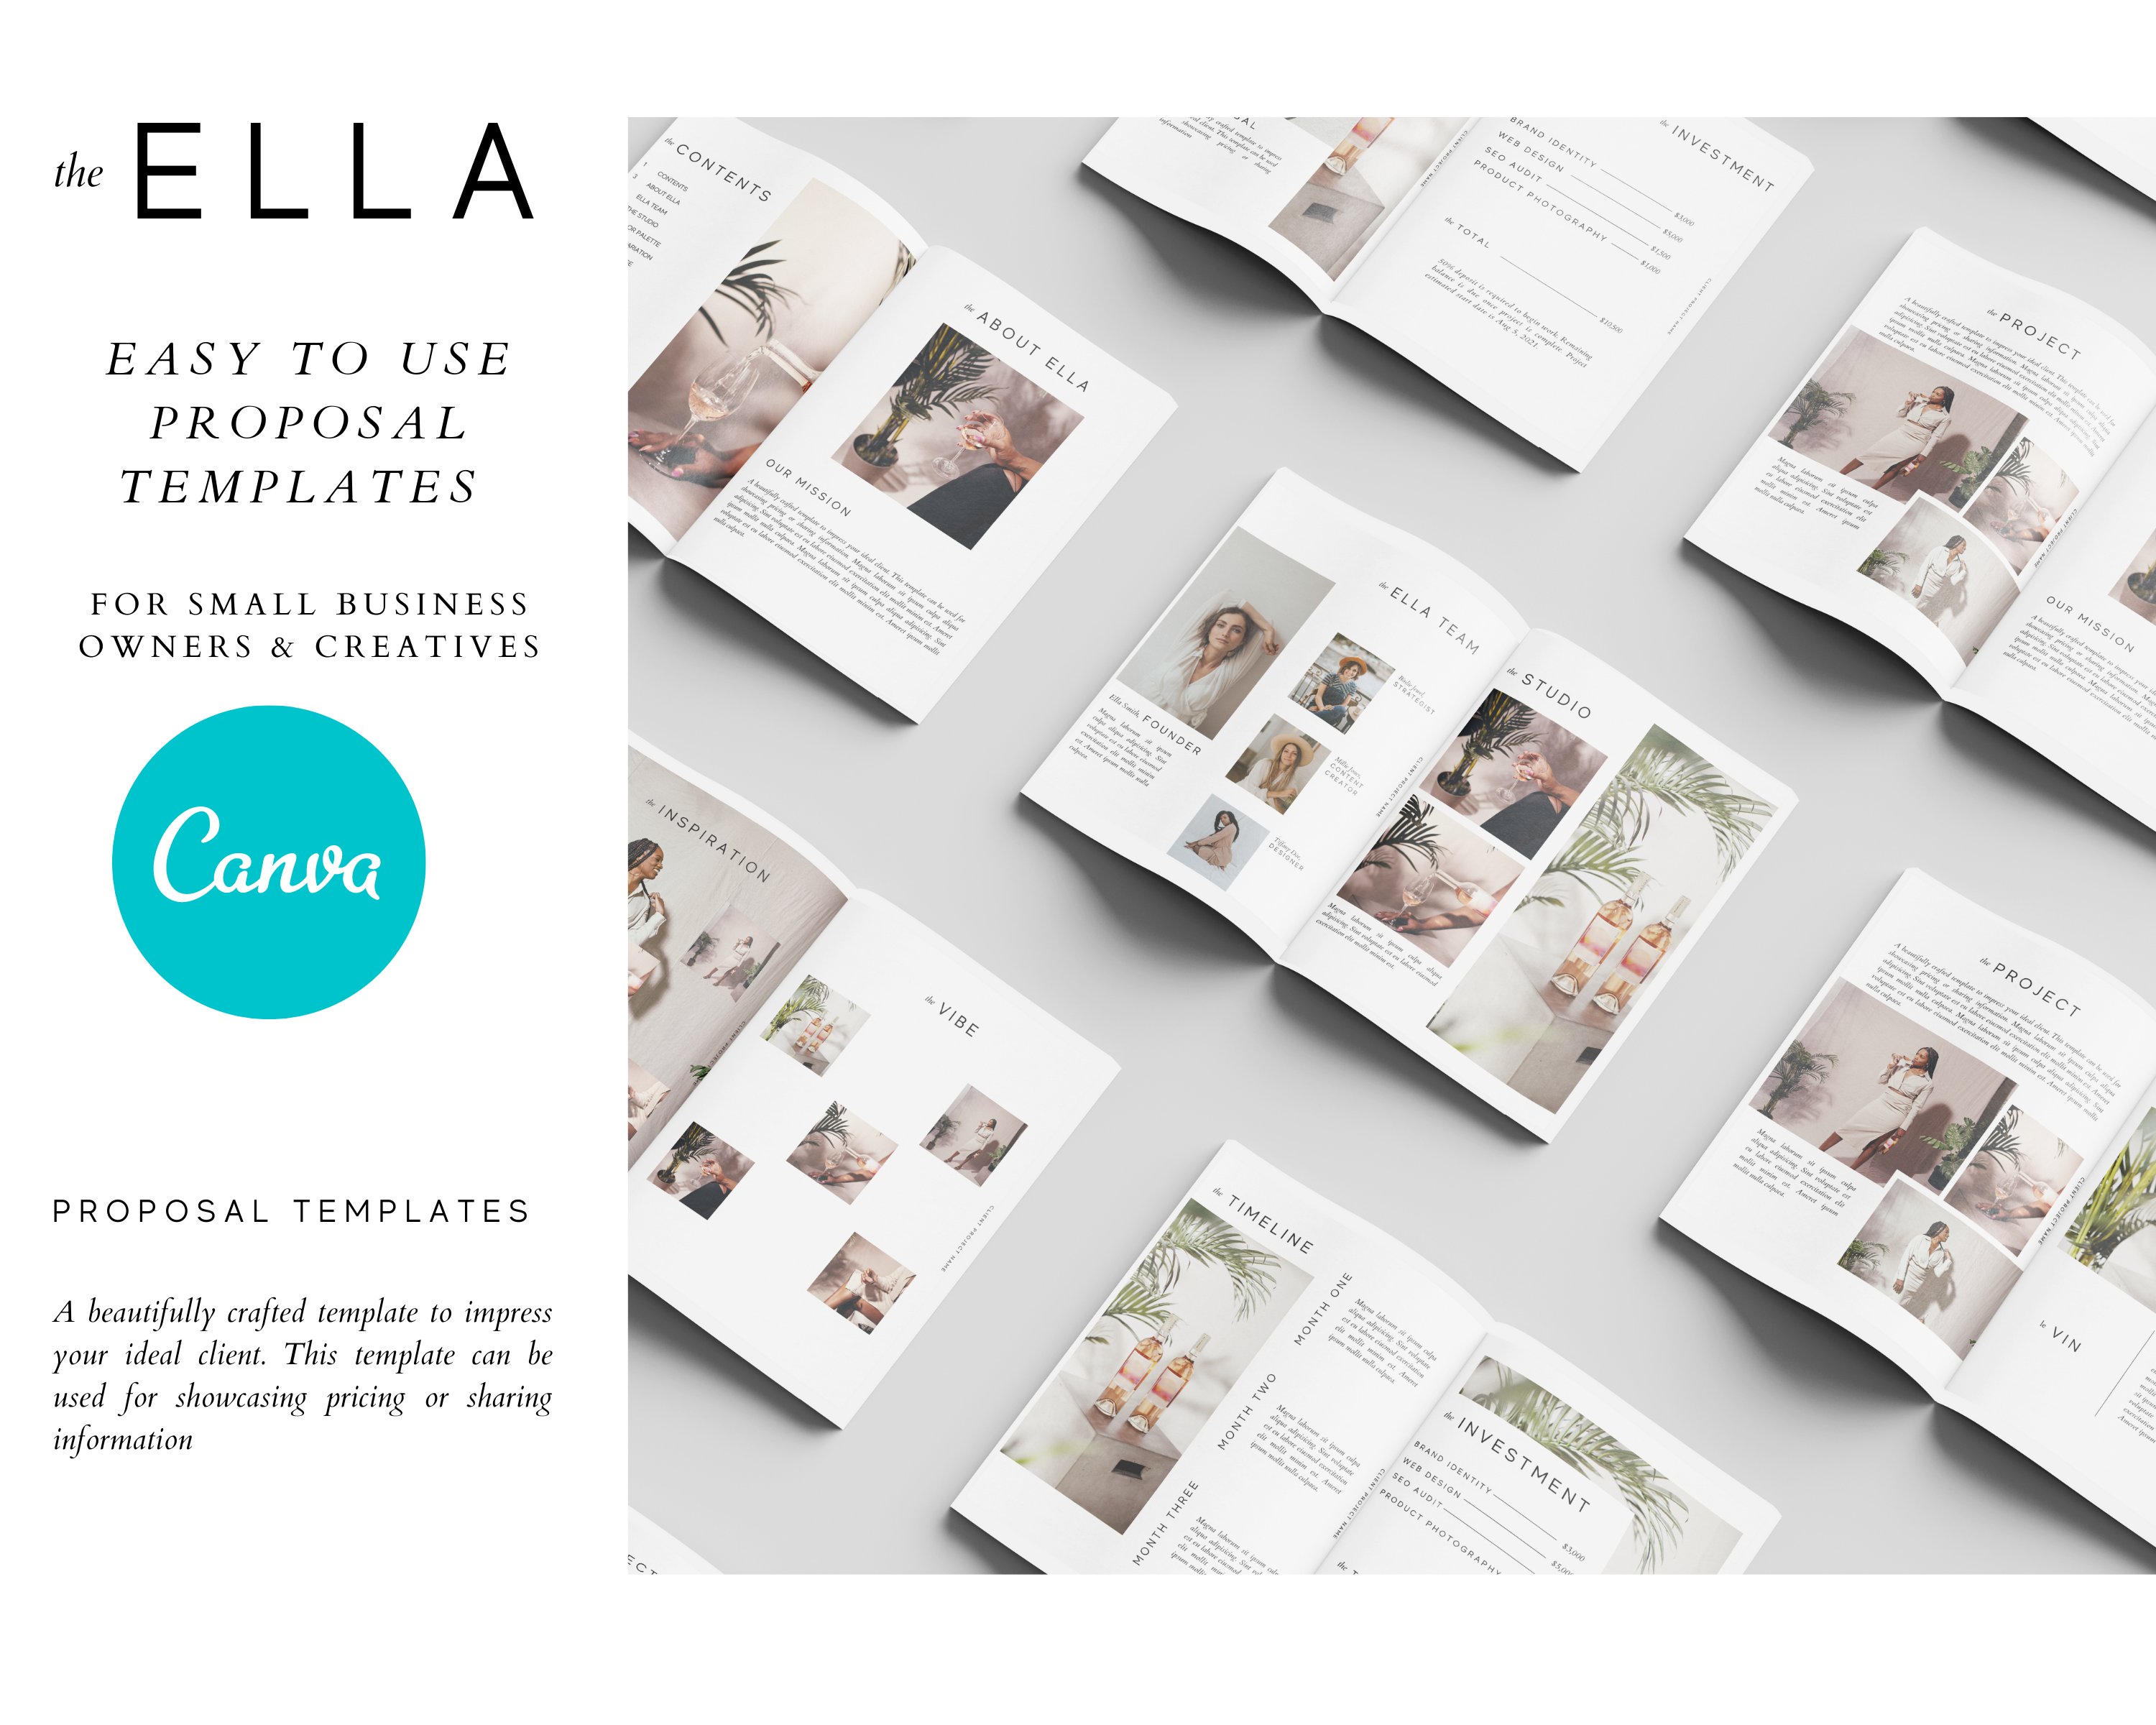 The Ella Proposal Template cover image.